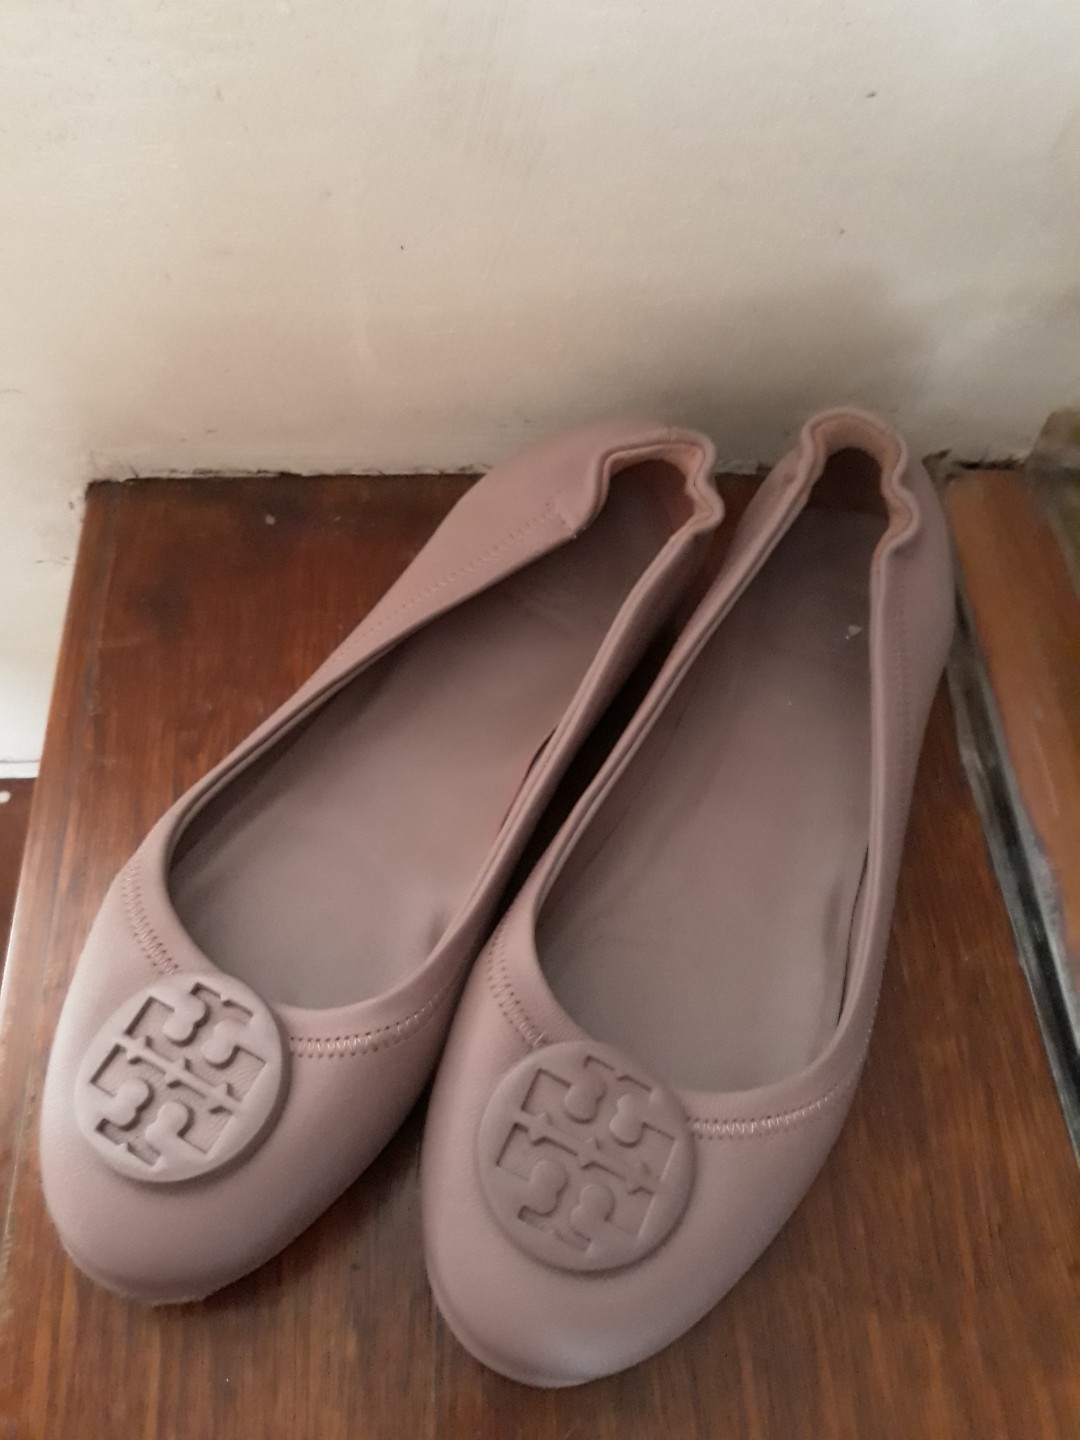 Used tory burch nude shoes s39, Women's 